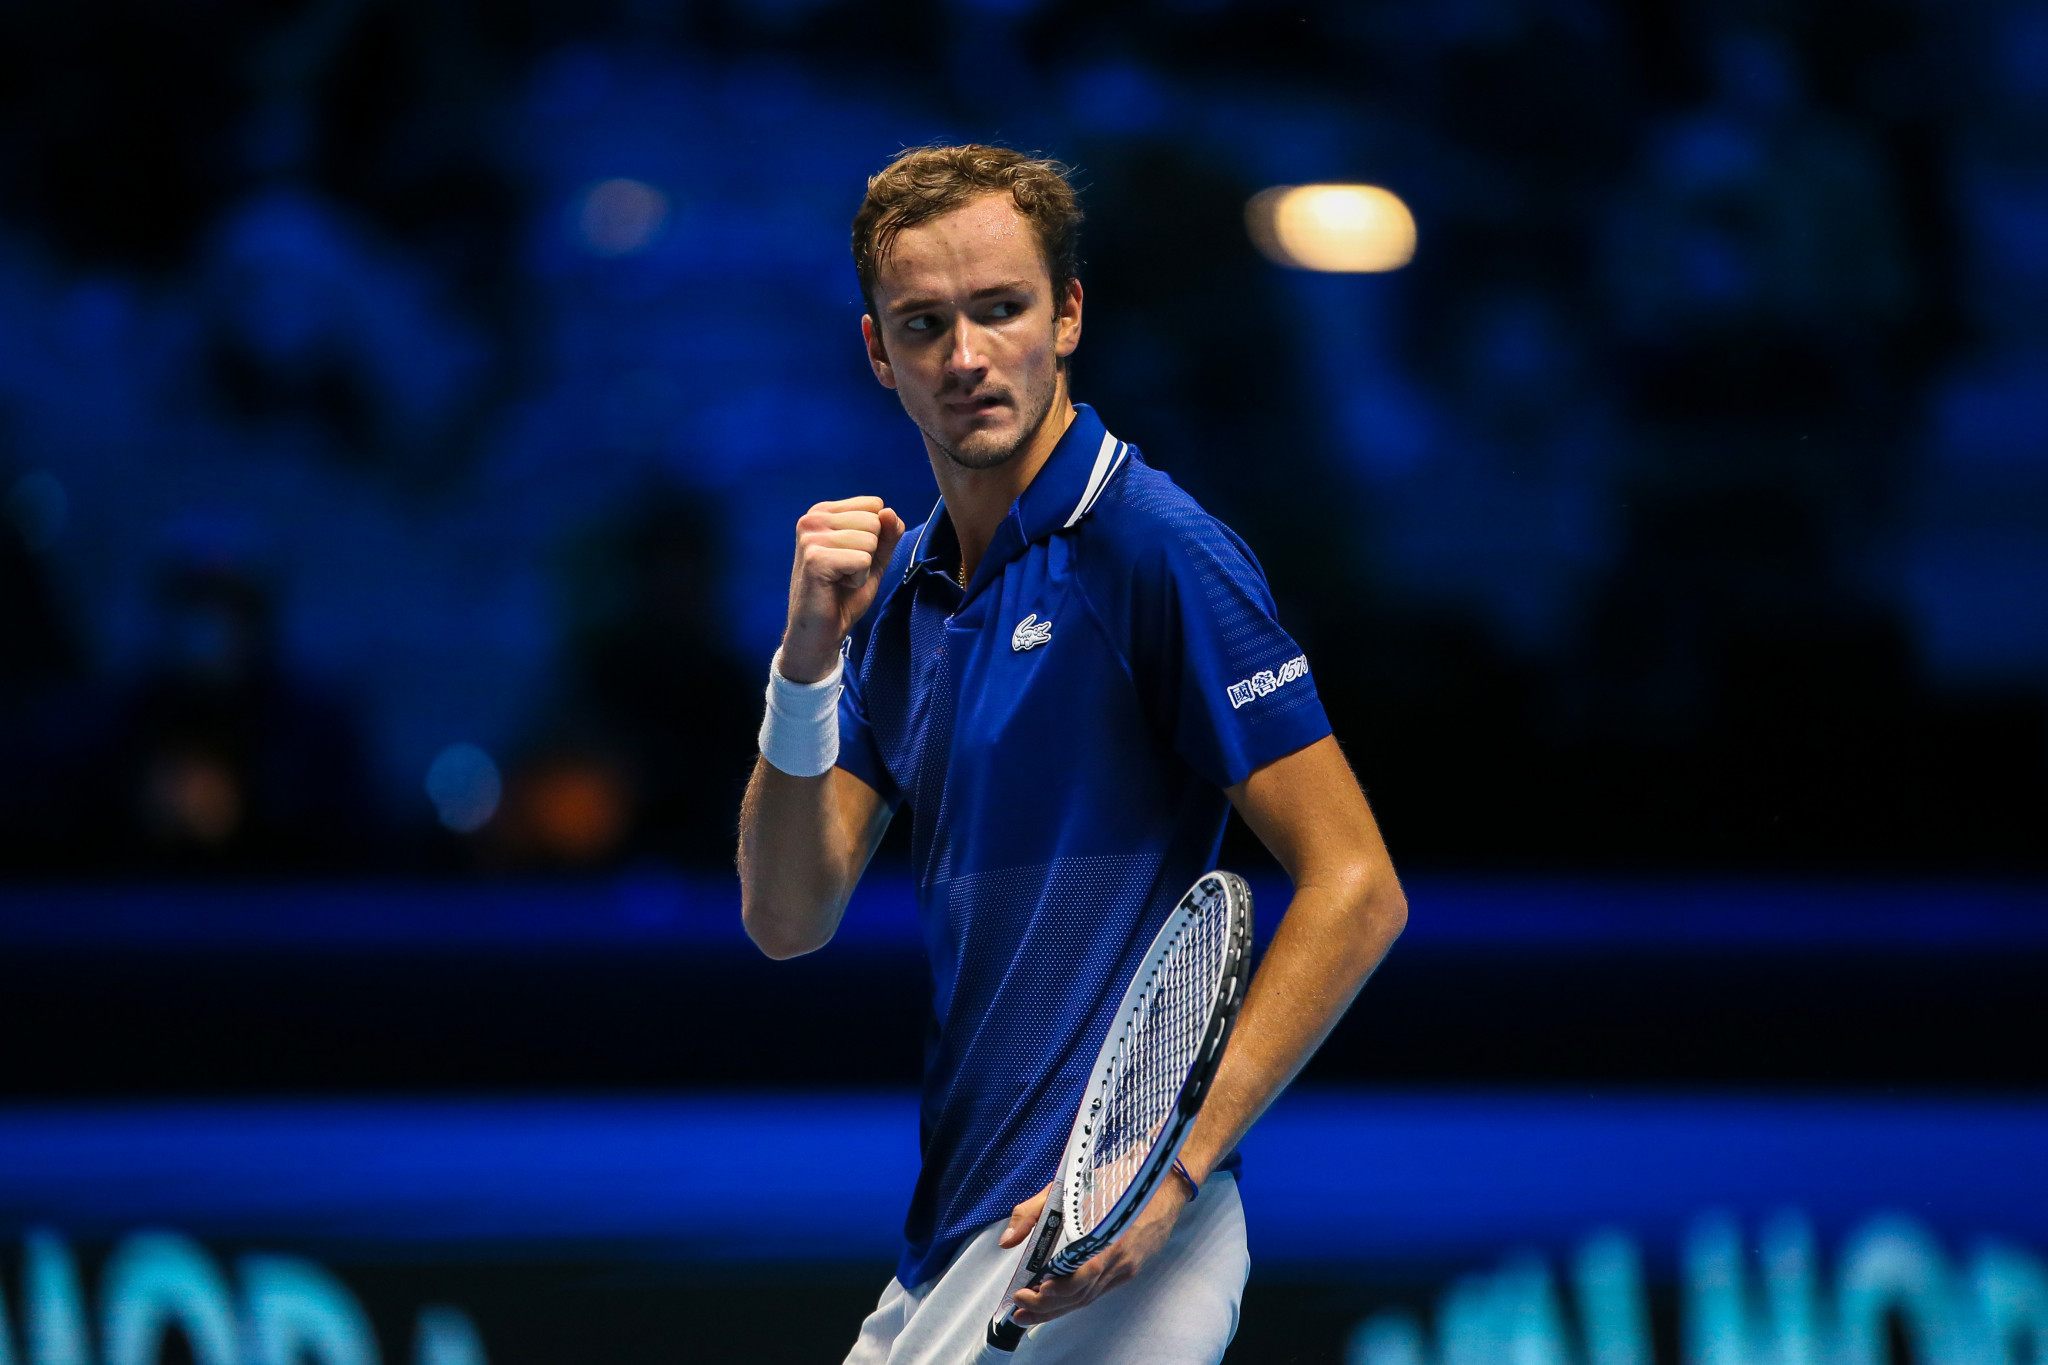 Daniil Medvedev secured victory in a tense contest against Alexander Zverev at the ATP Finals ©Getty Images